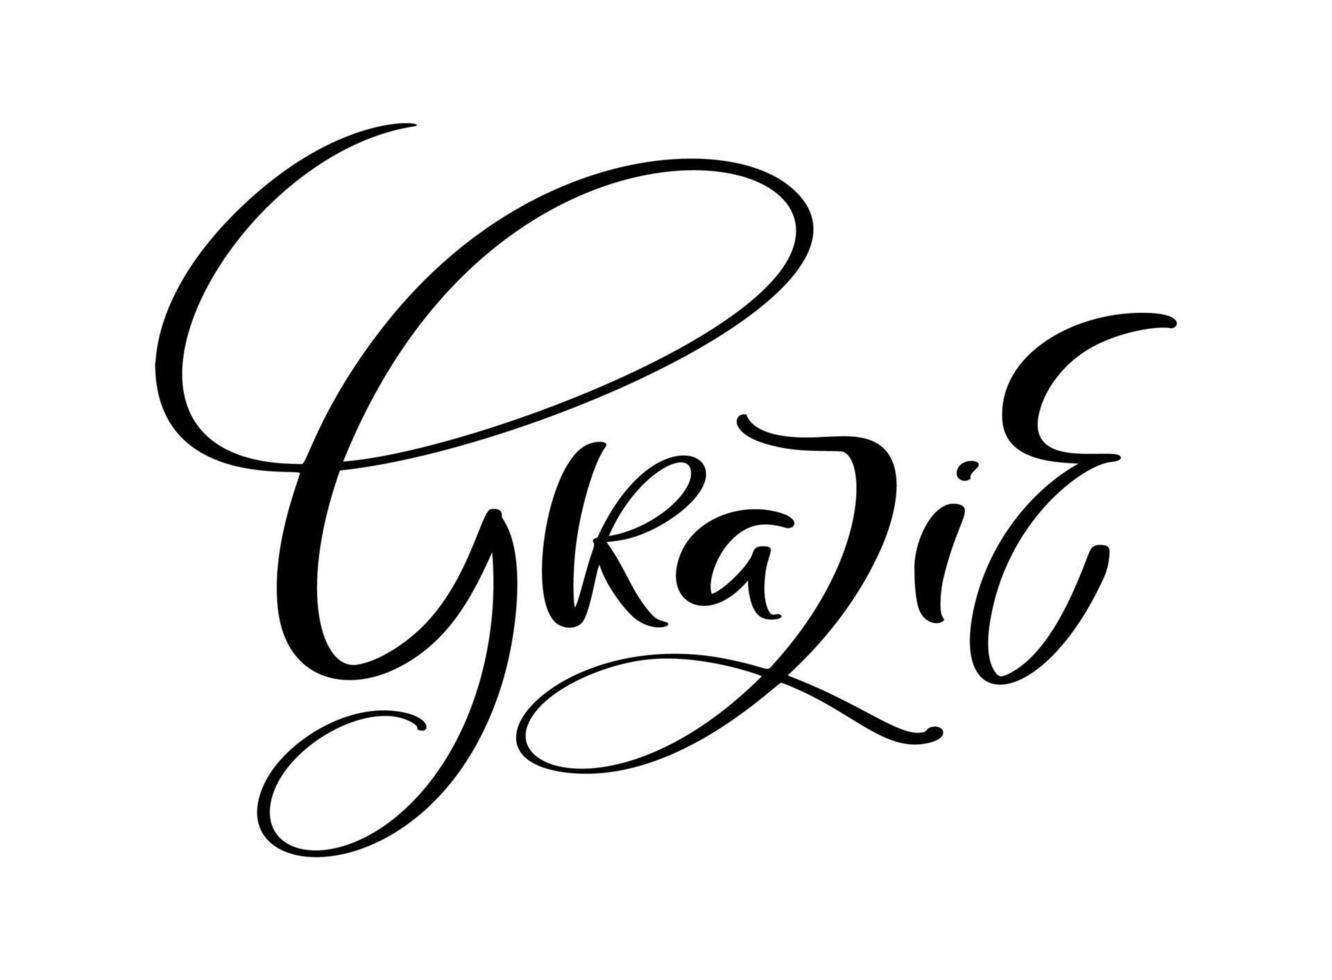 Grazie handwritten lettering text. Thank you in Italian language. Ink illustration. Modern brush calligraphy. Isolated on white background. Gratitude words for postcards vector